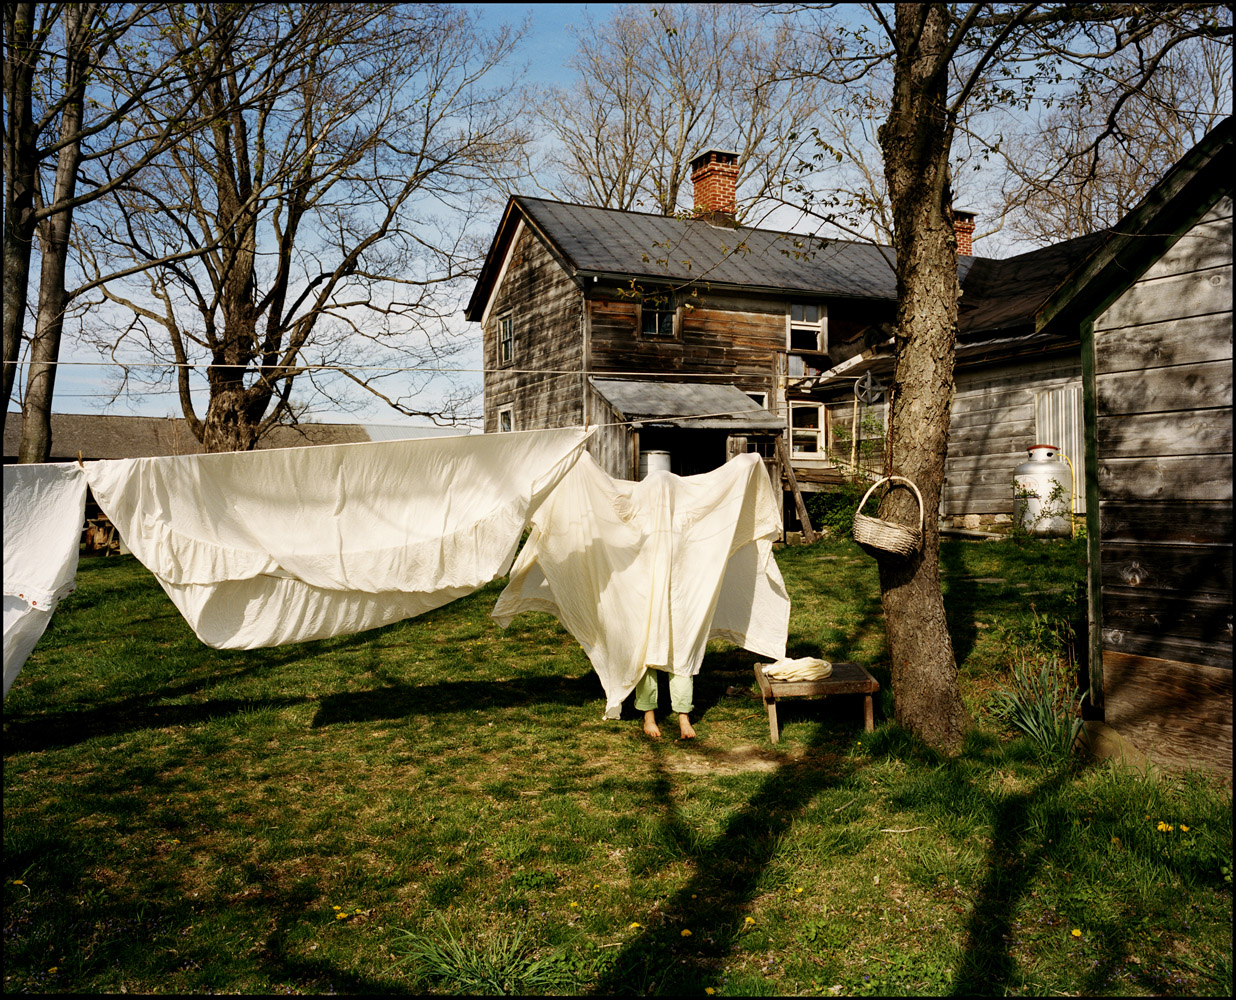 2007: Justin MaxonMarina Lopez, 21, hangs laundry out to dry on a horse farm outside of Gardiner, N.Y., as a strong wind wraps the bed sheet in her hands around her body. Lopez recently moved away from the farm, but she lived on it for over three years and it will always be home to her.
                               There are rare moments in one's life that can be placed in a glass bottle and later reveled as monumental in helping shape your present form. I hold the Eddie Adams Workshop in that place of reverence. The support system that began during that weekend, has contributed to the landscape of my career. I carry with me the countless relationships that, over the years, have lifted me up towards the heights of my aspirations.